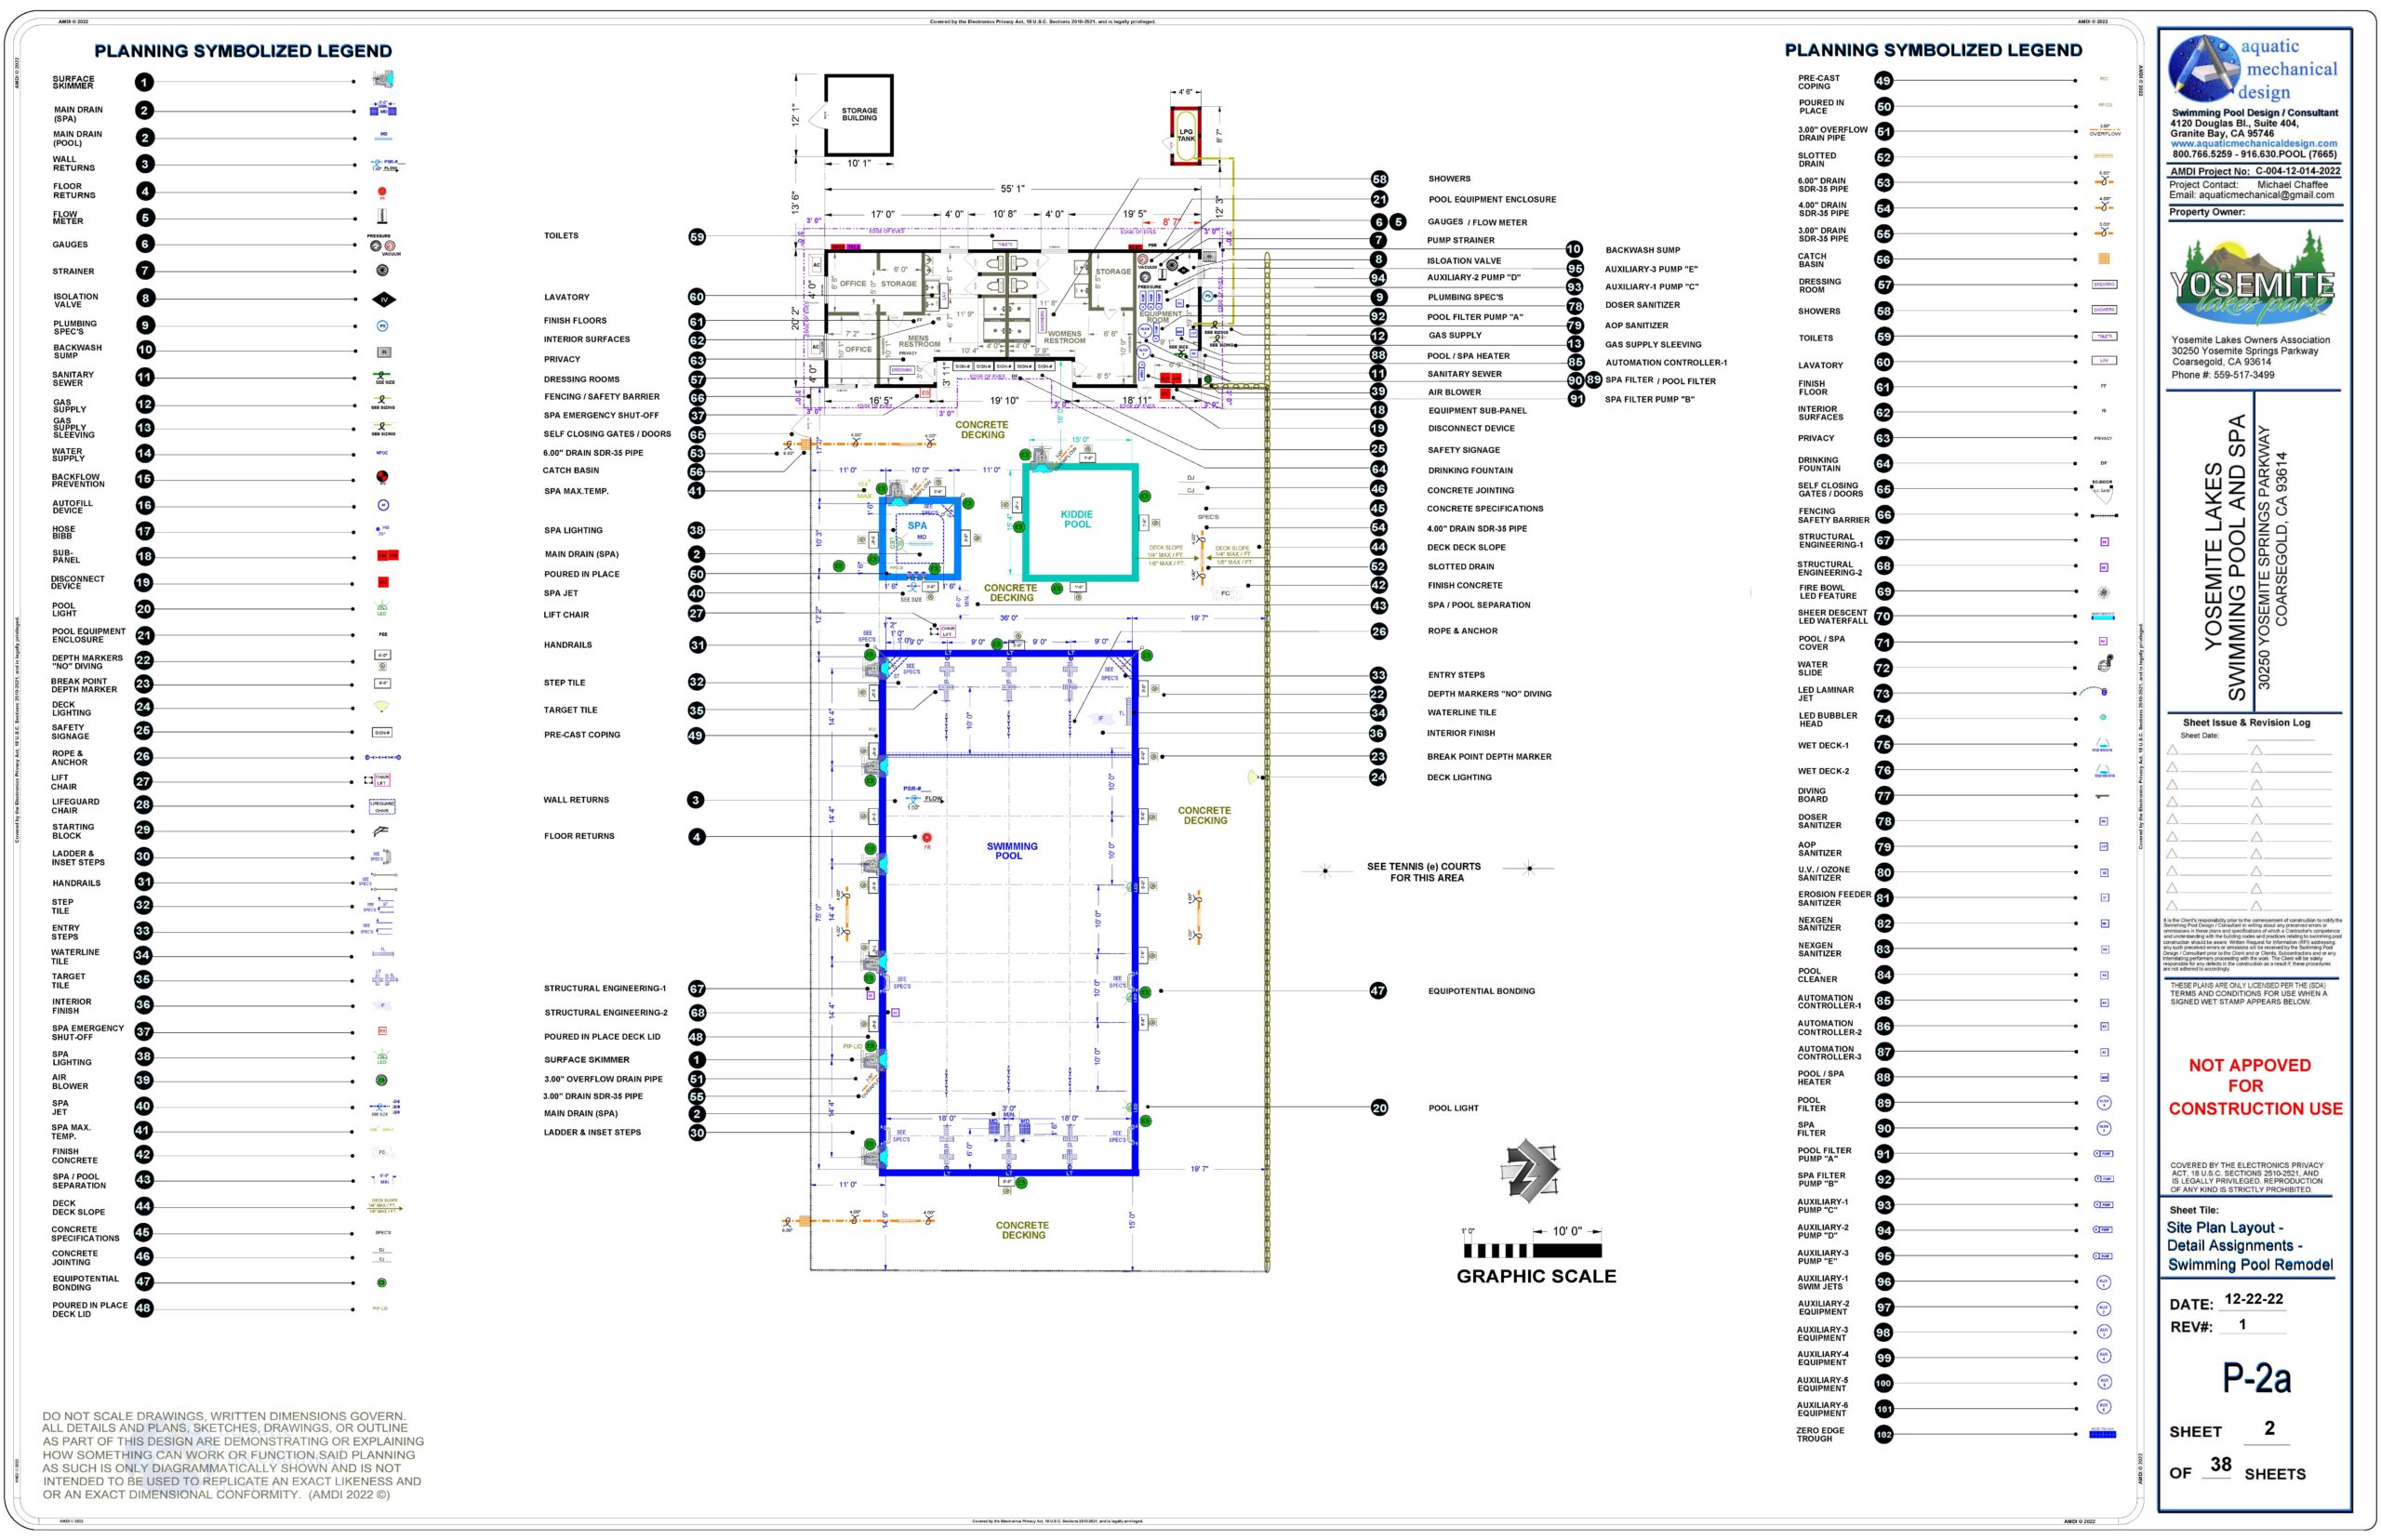 EXISTING SWIMMING POOL / SITE PLAN AREA LAYOUT